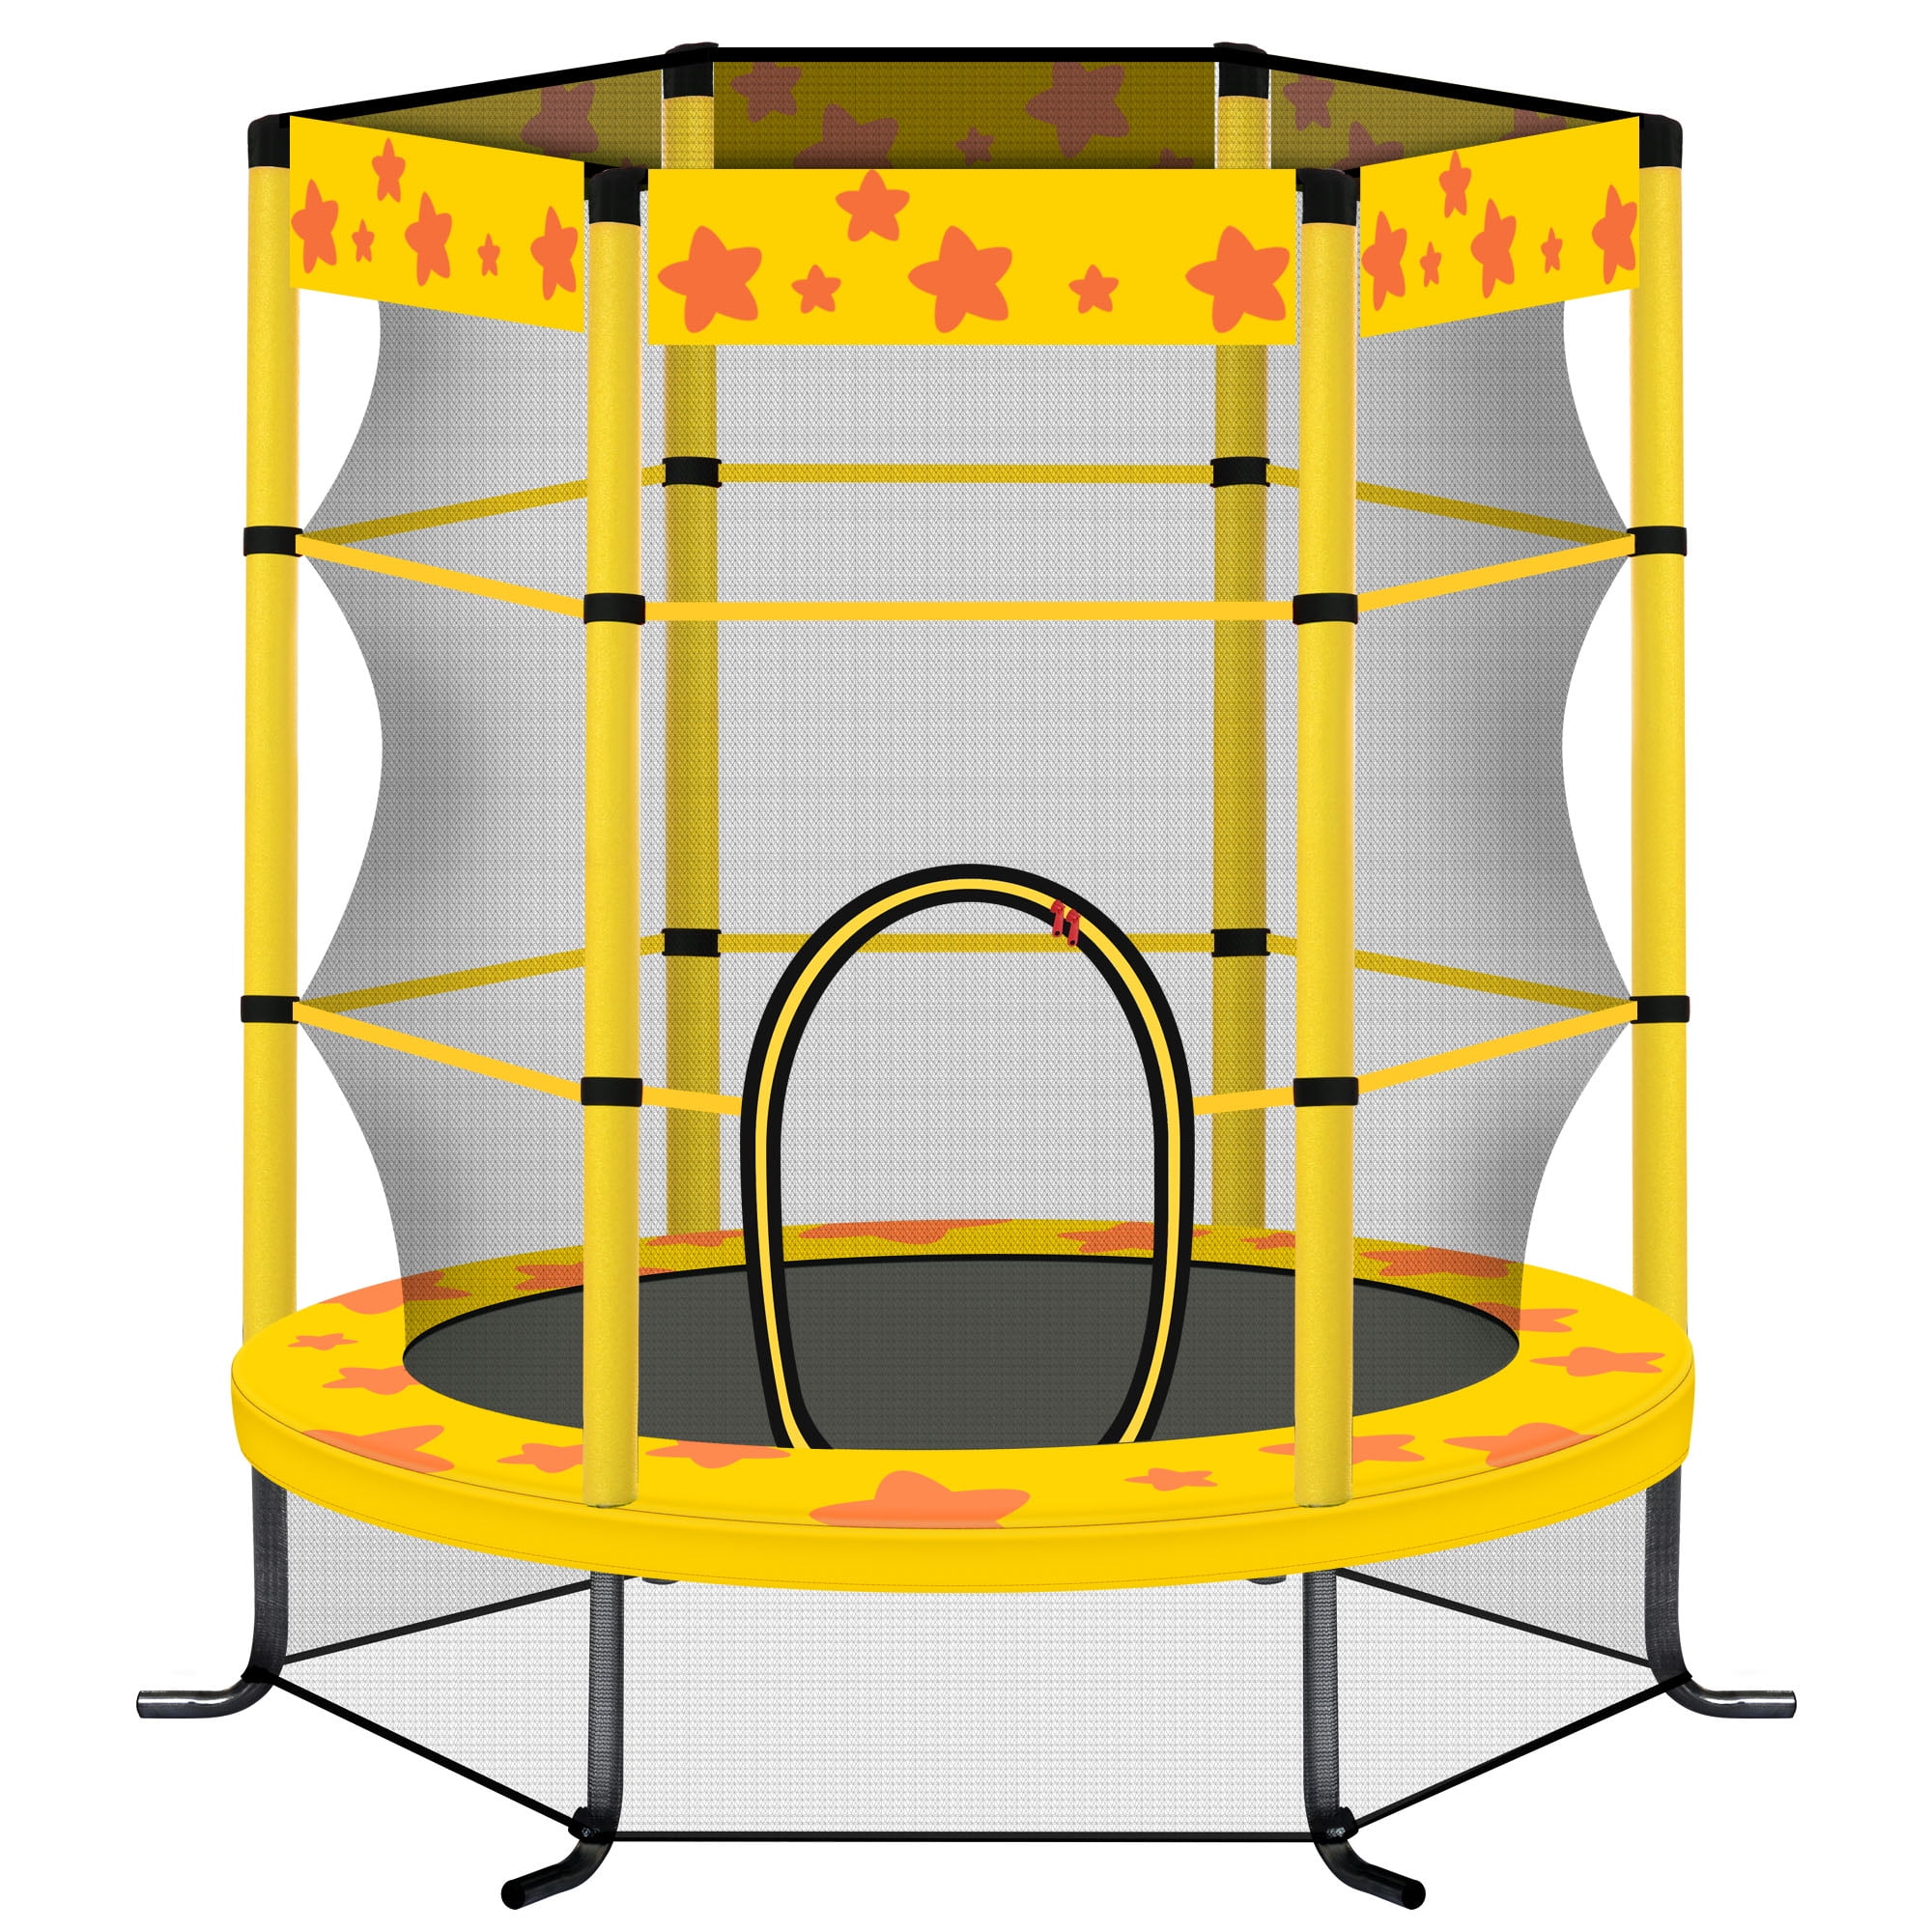 55” Toddler Trampoline, BTMWAY New Upgraded 4.5FT Kids Trampoline, Indoor/Outdoor Ultra Safe Mini Baby Trampoline with All Round Enclosure Net, Safety Pad, Gifts for Birthday Girls Ages 1-6 - image 1 of 5